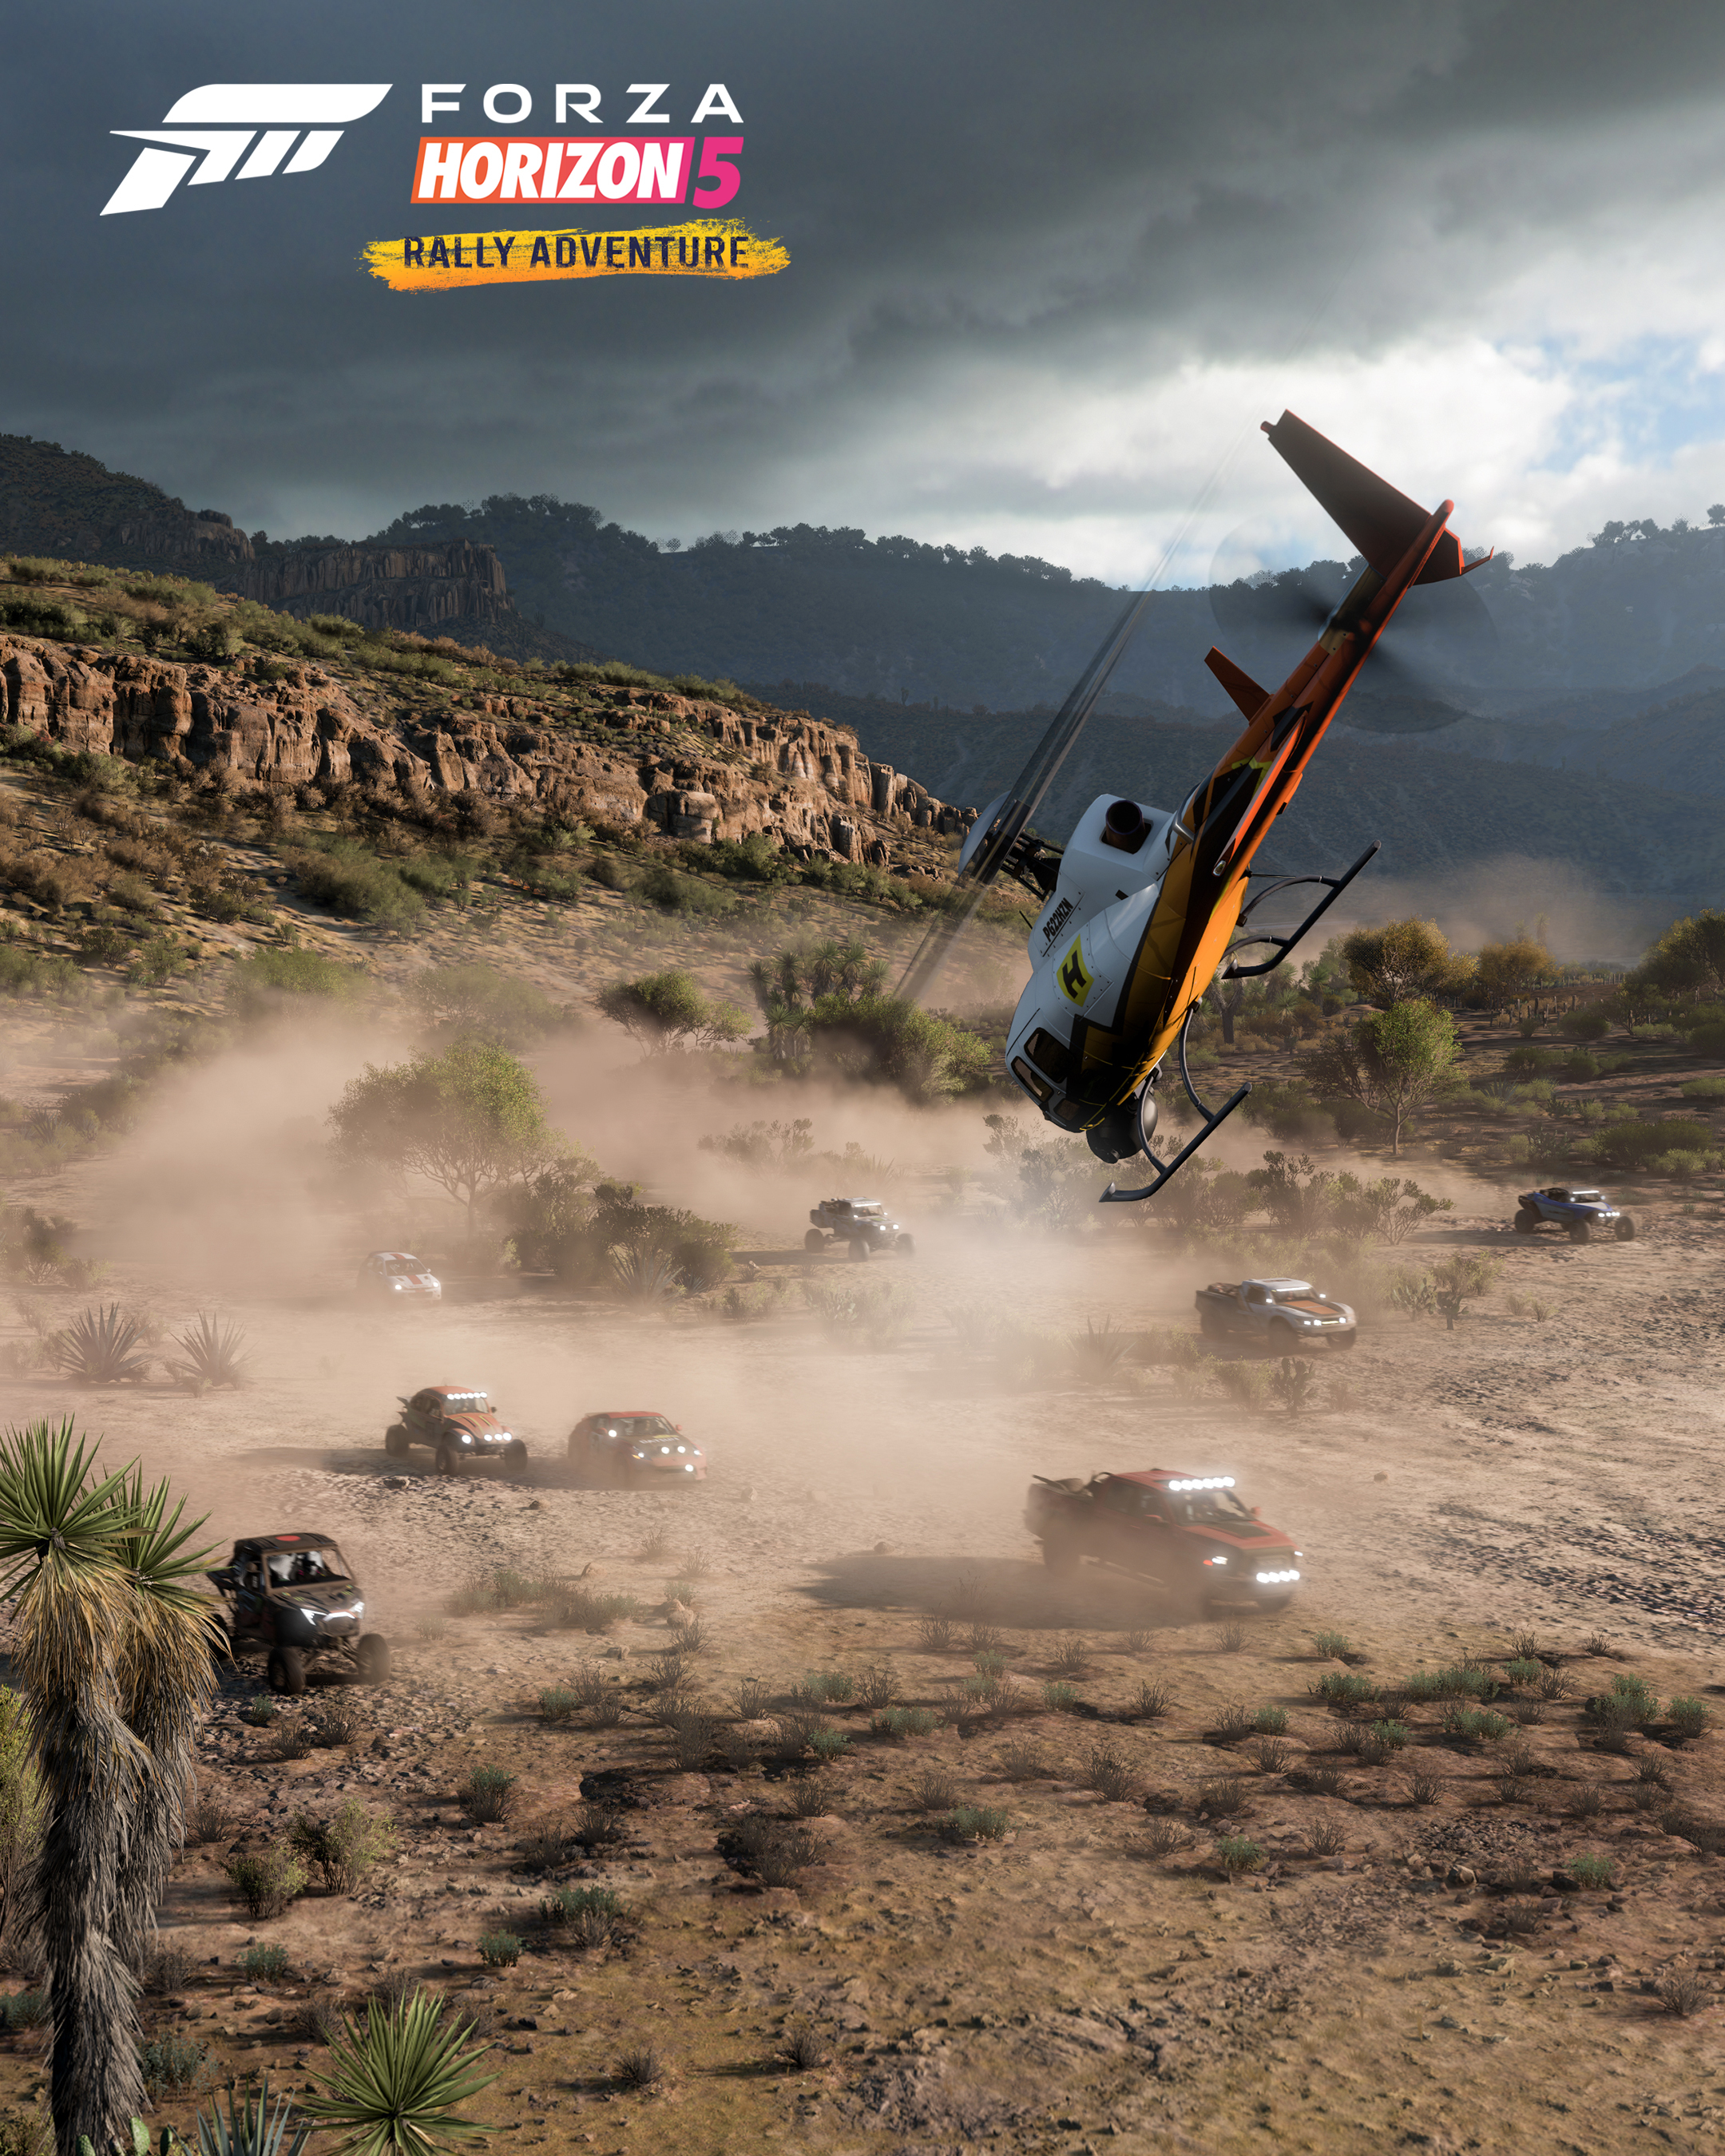 We have new images of Forza Horizon 5: Rally Adventure, and they are almost to frame